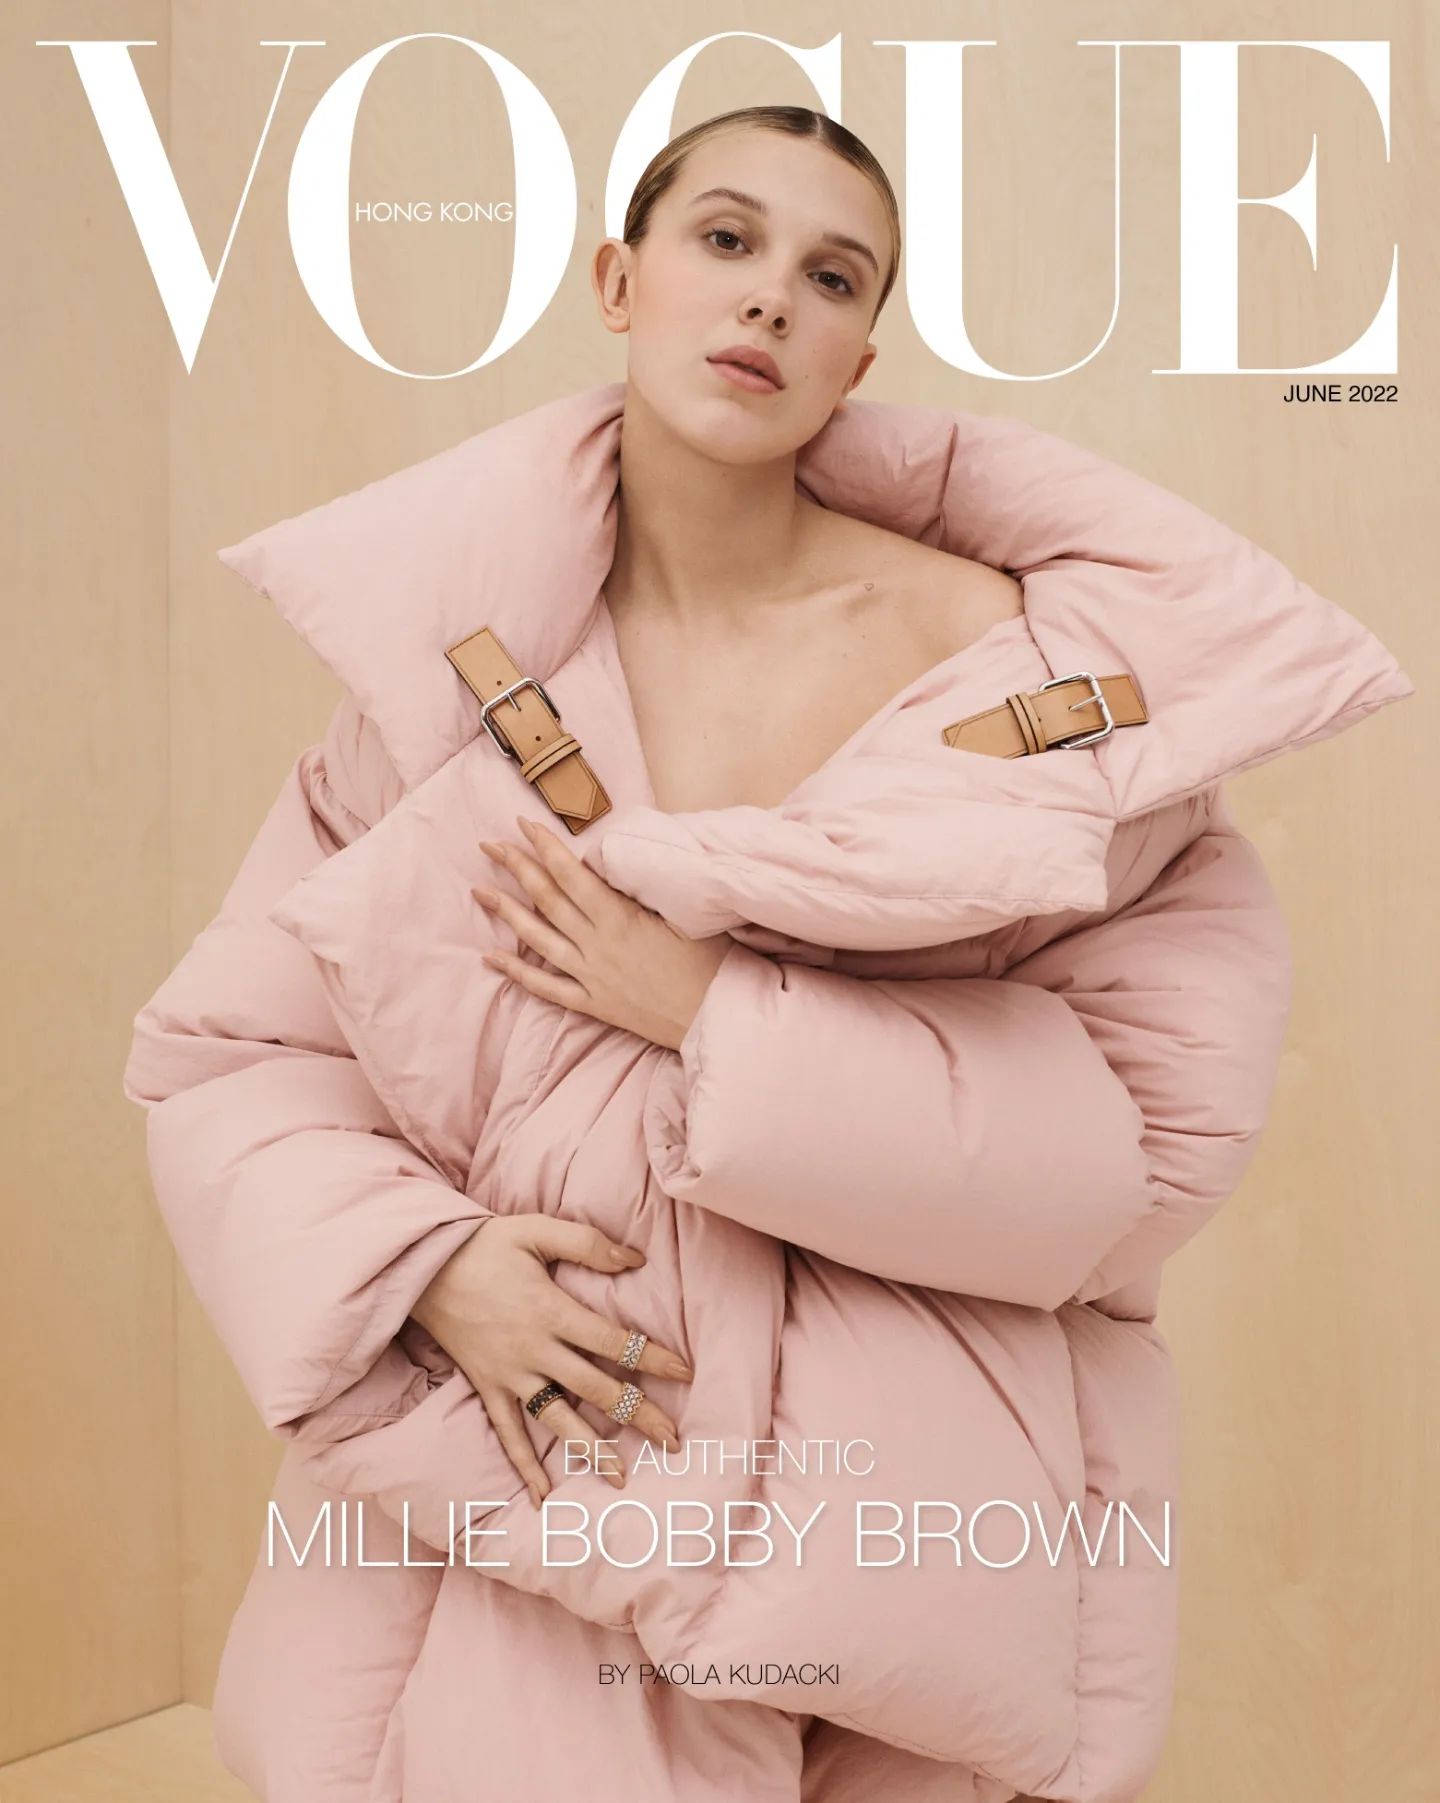 Millie Bobby Brown photoshoot for Vogue Hong Kong Magazine, June 2022 Issue